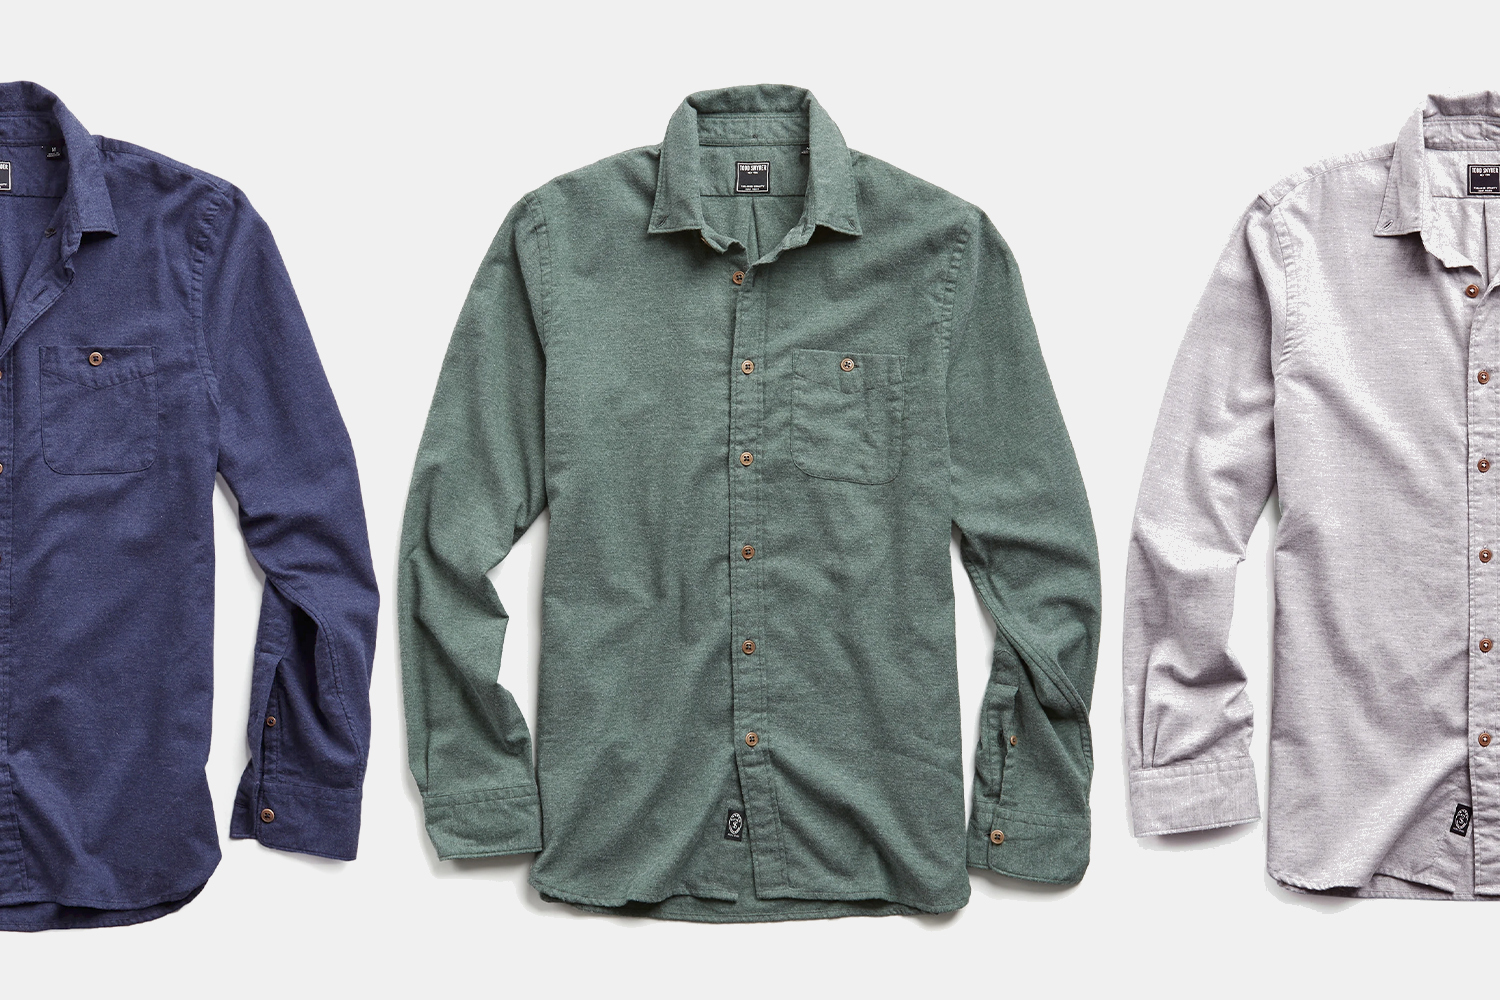 Deal: Save $104 on Todd Snyder’s Cotton Cashmere Twill Shirt